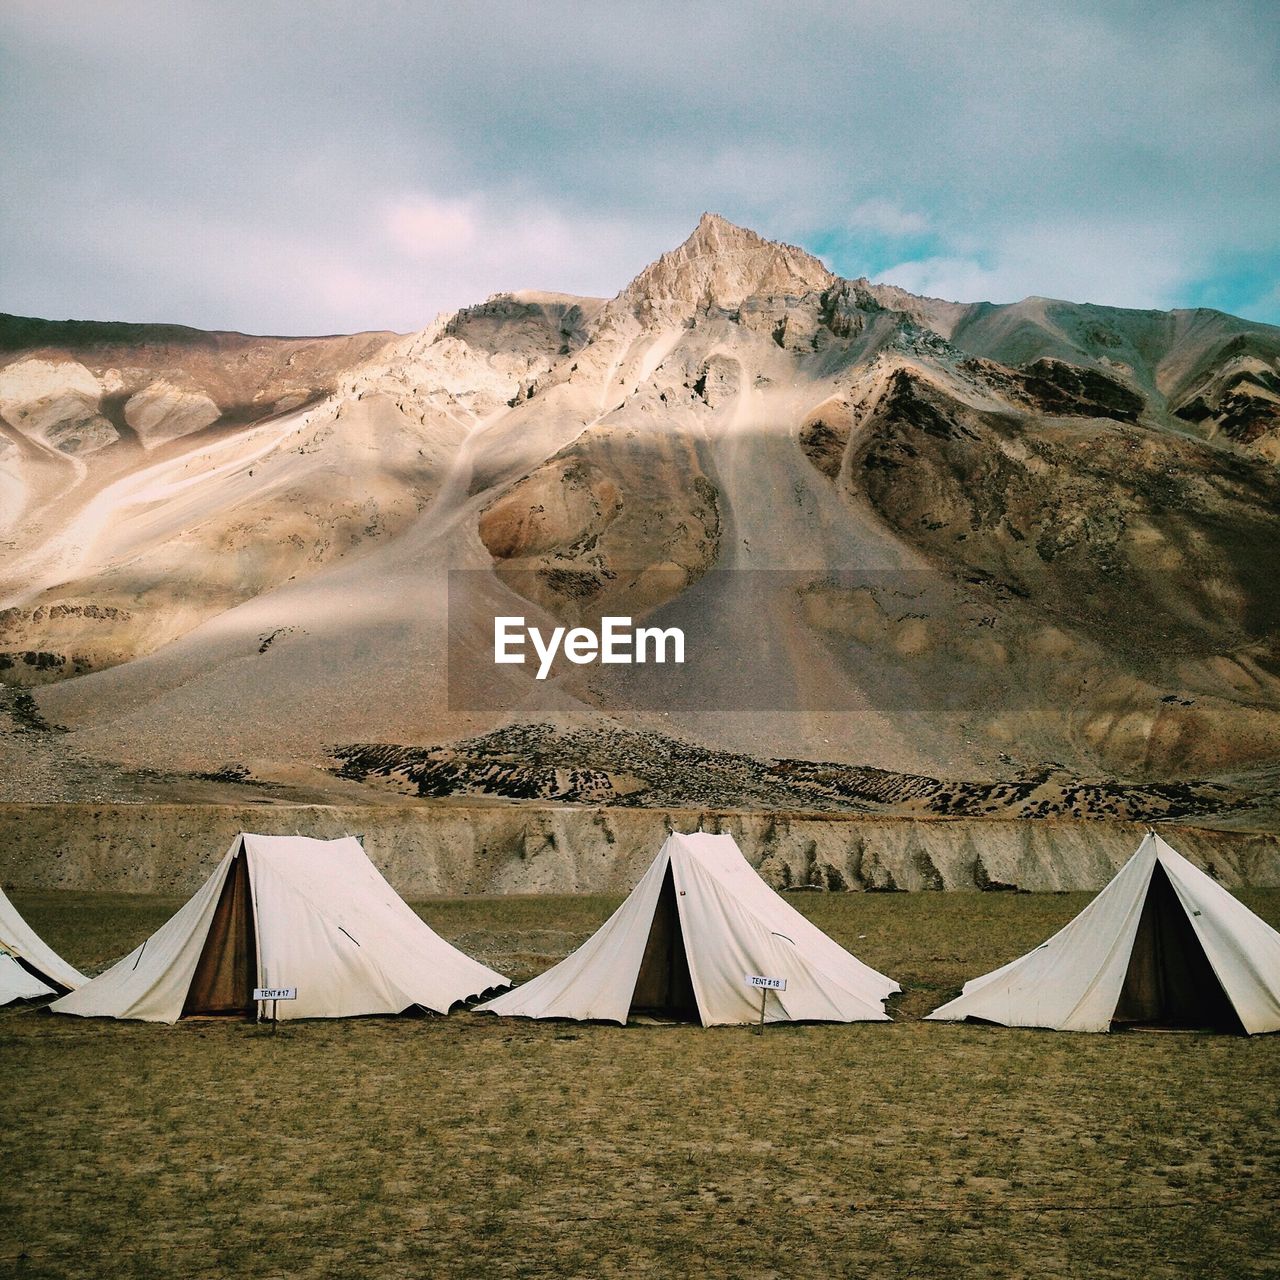 View of tents on field with mountains in background